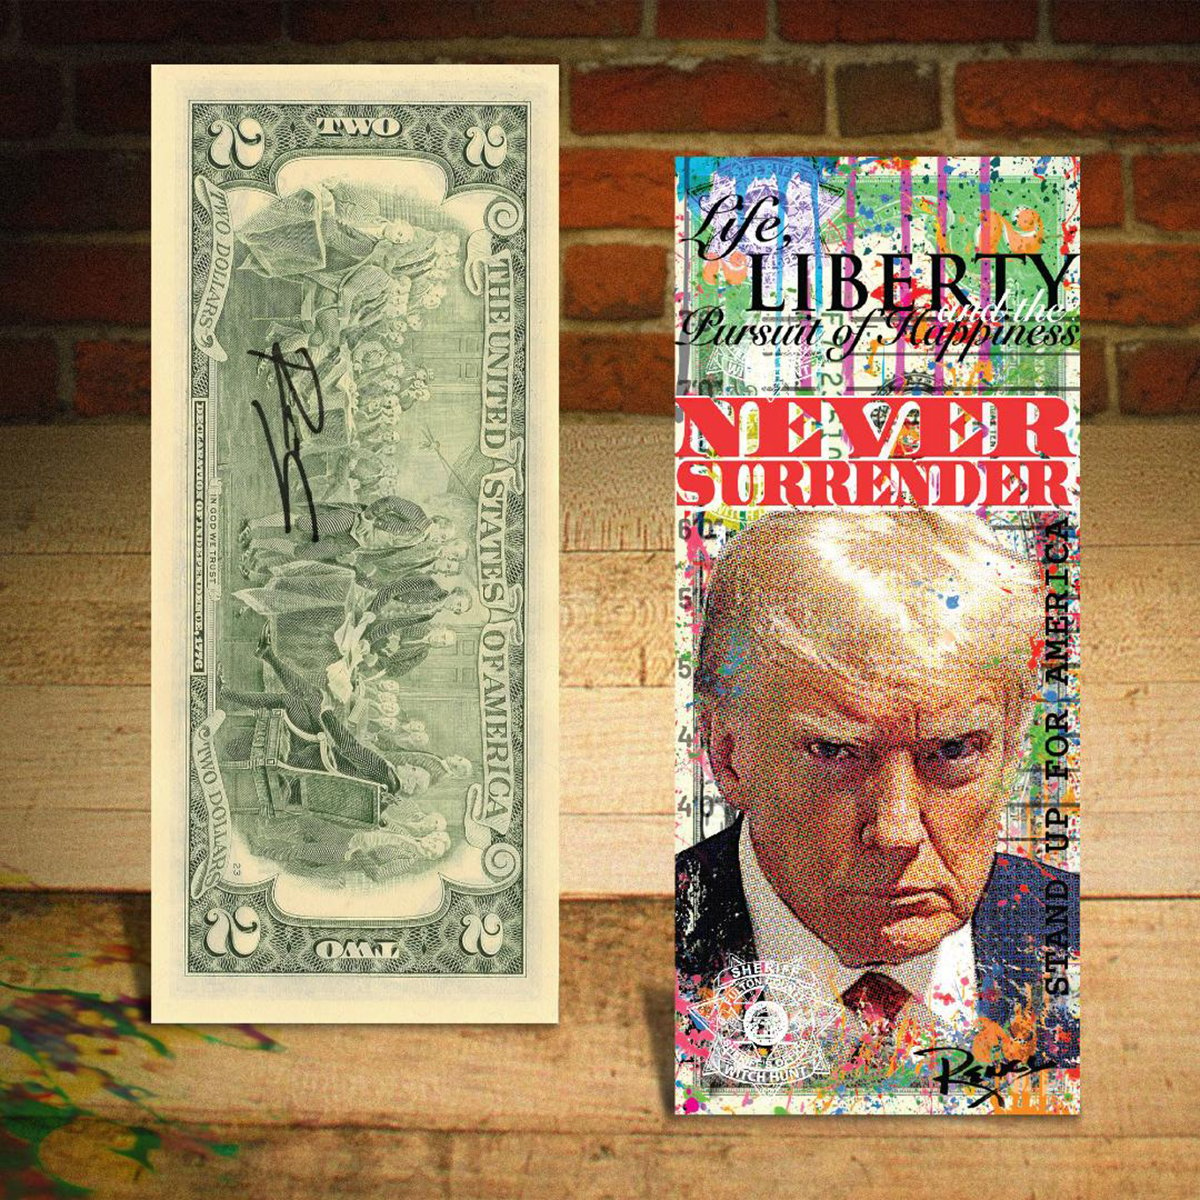 A $2 dollar bill with Trump's face on it